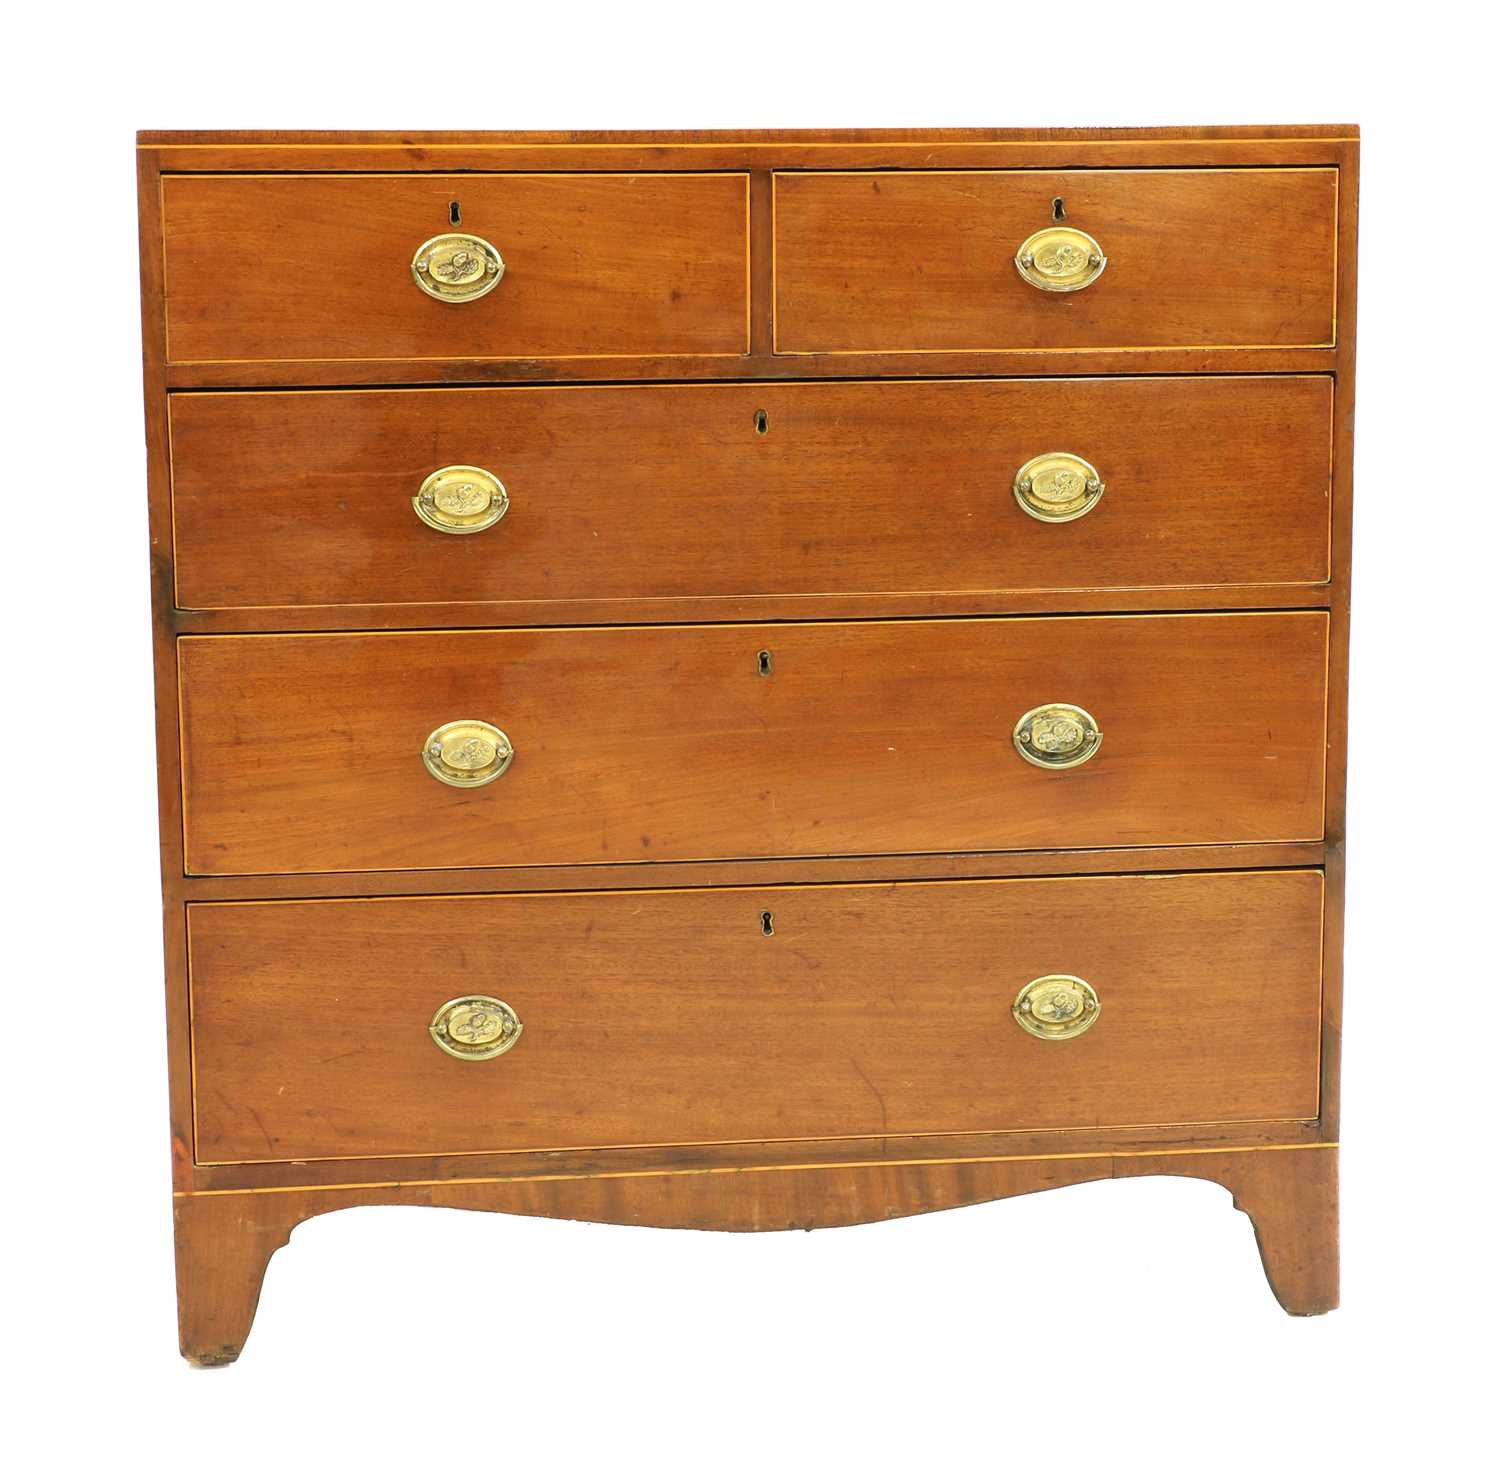 Lot 308 - A 19th century inlaid mahogany chest of five drawers